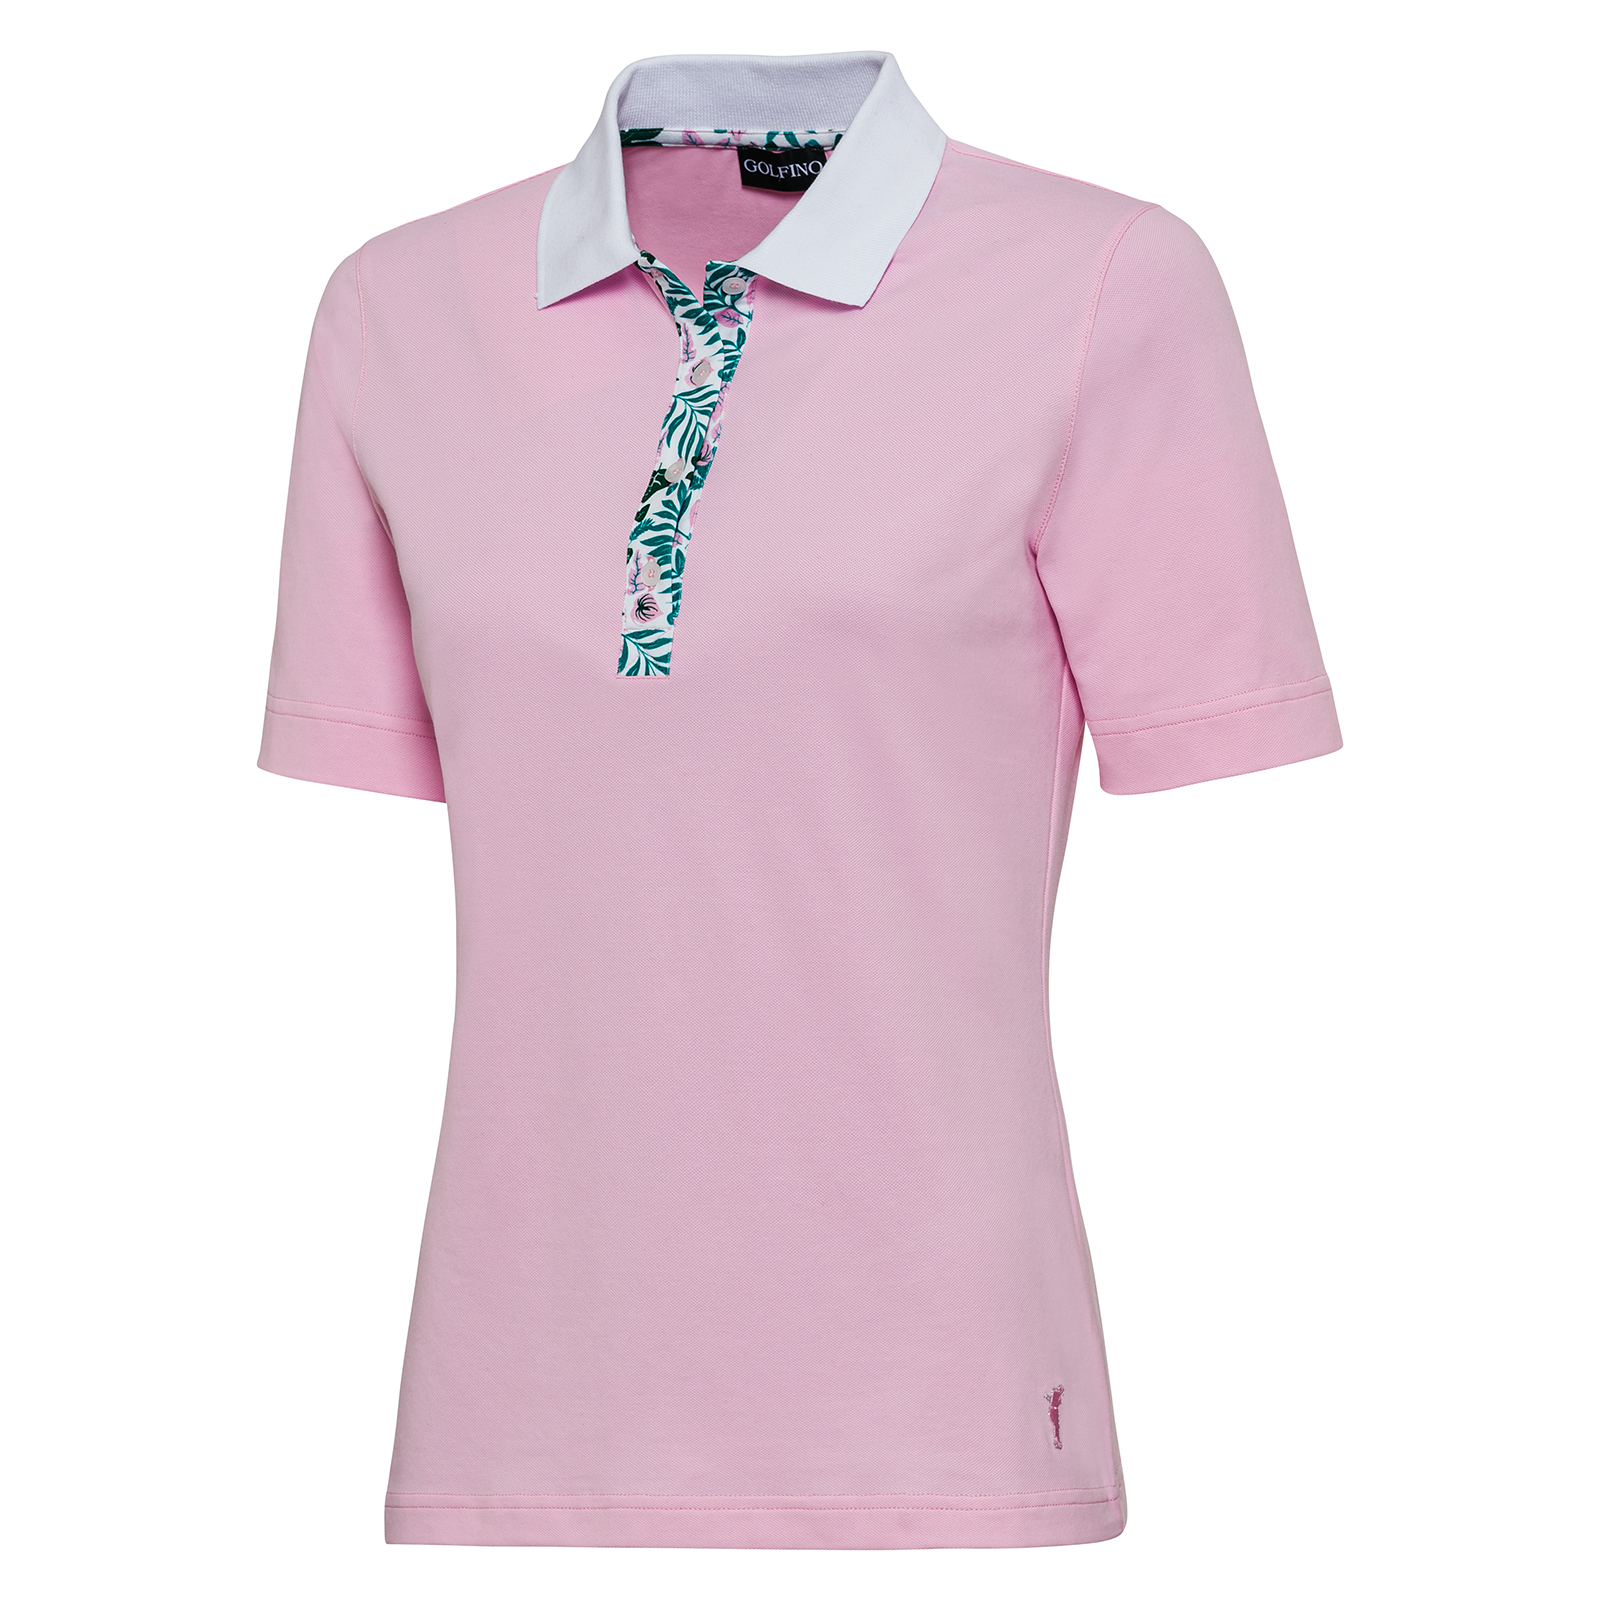 Ladies' golf polo shirt with sun protection